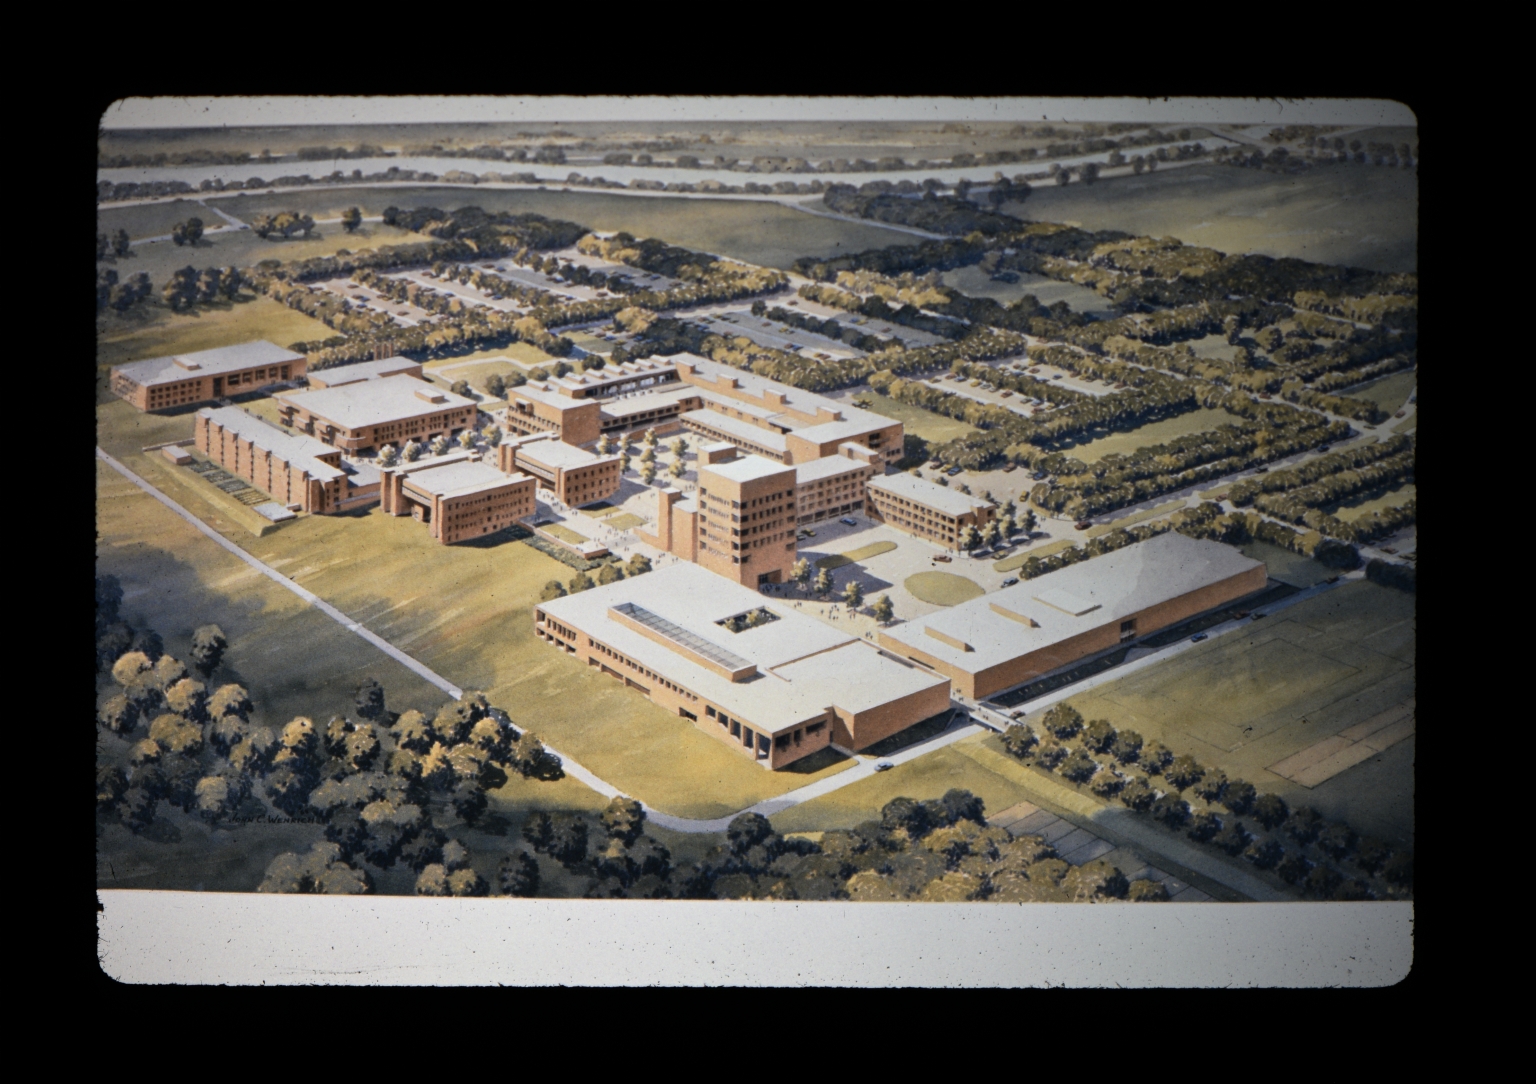 Concept painting of campus